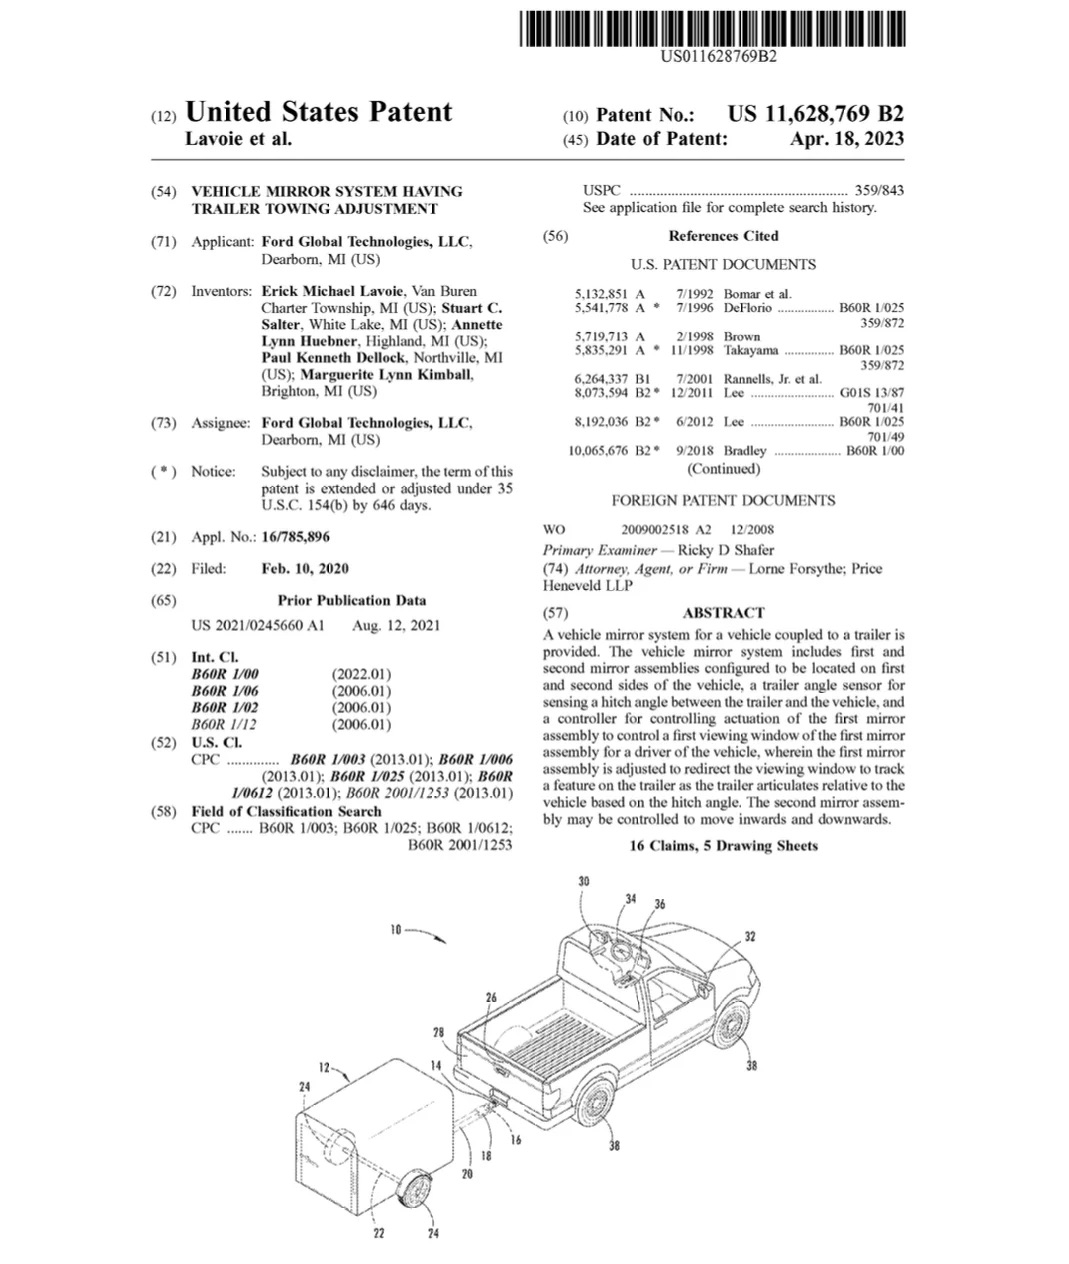 Ford Ranger Ford Patents Automatically Adjusting Mirrors for Trailer Towing ford-trailer-towing-adjustment-mirror-system-1